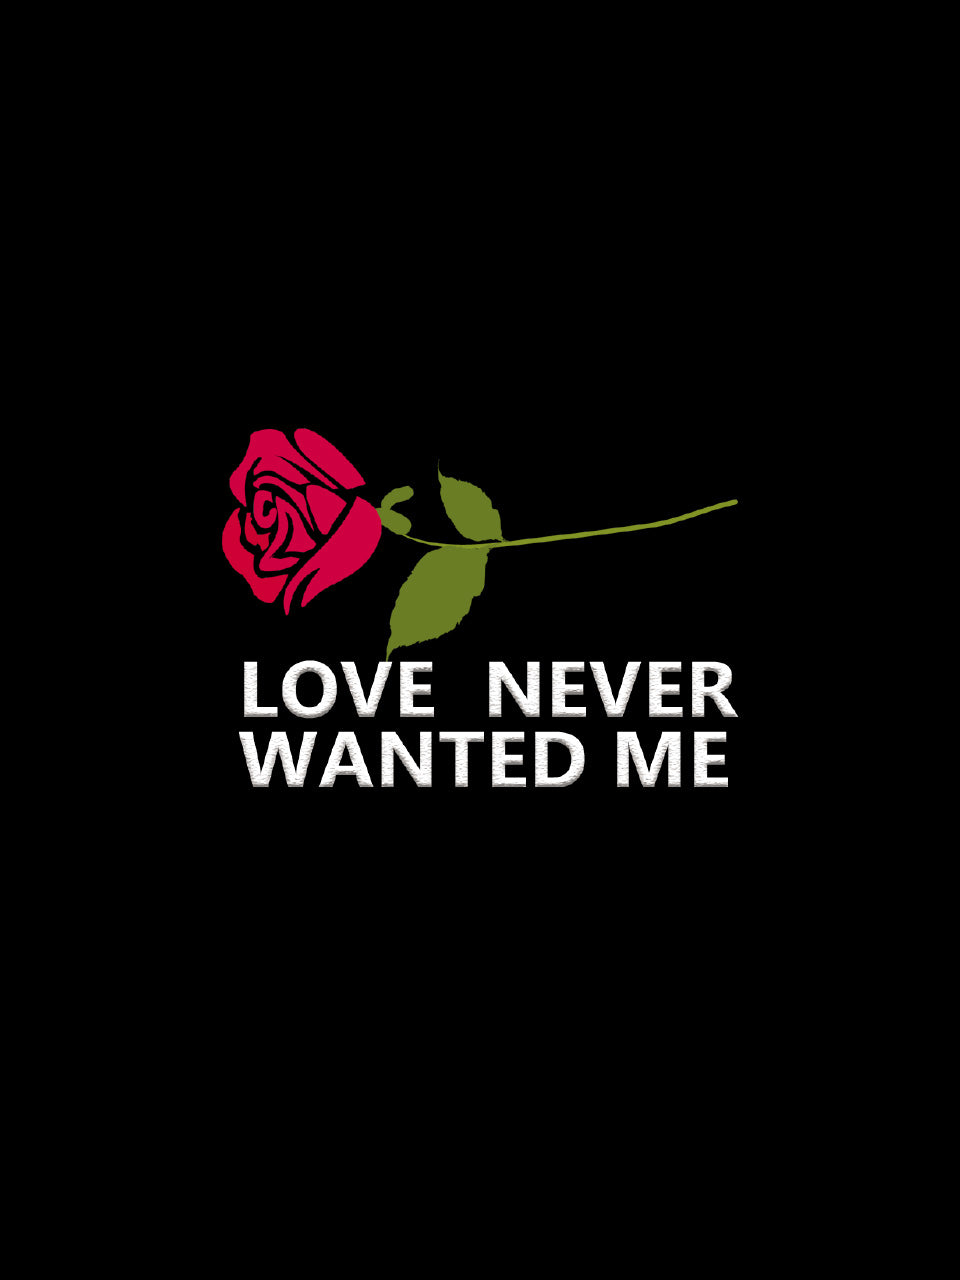 Love never wanted me